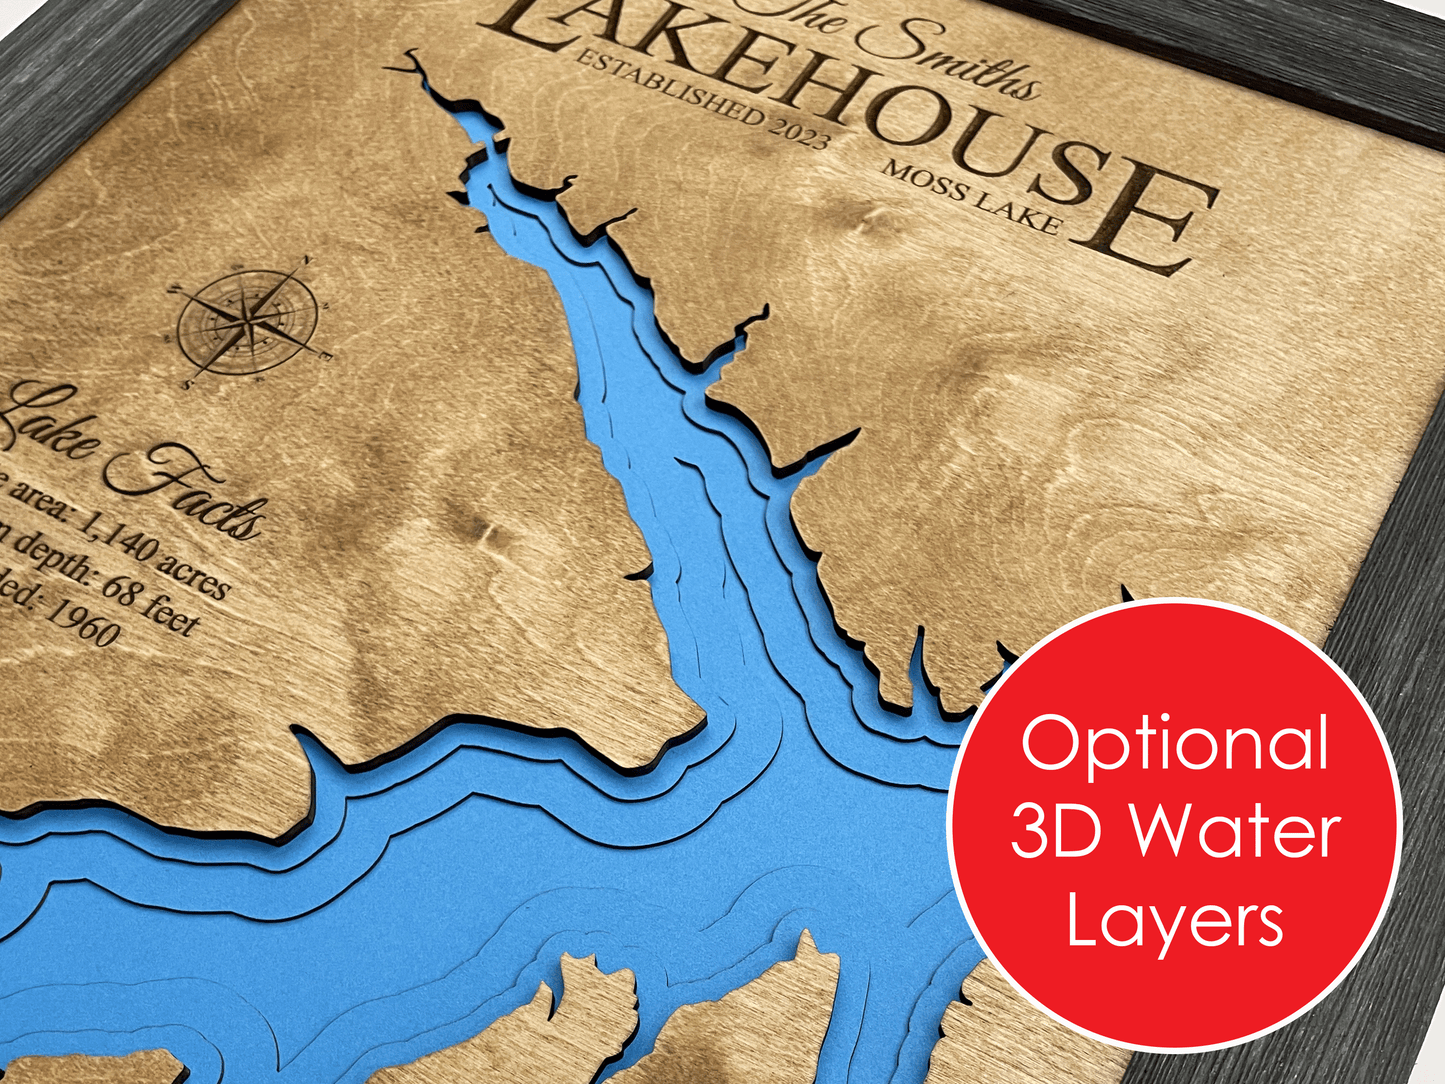 3D Waters Layers Added To Map